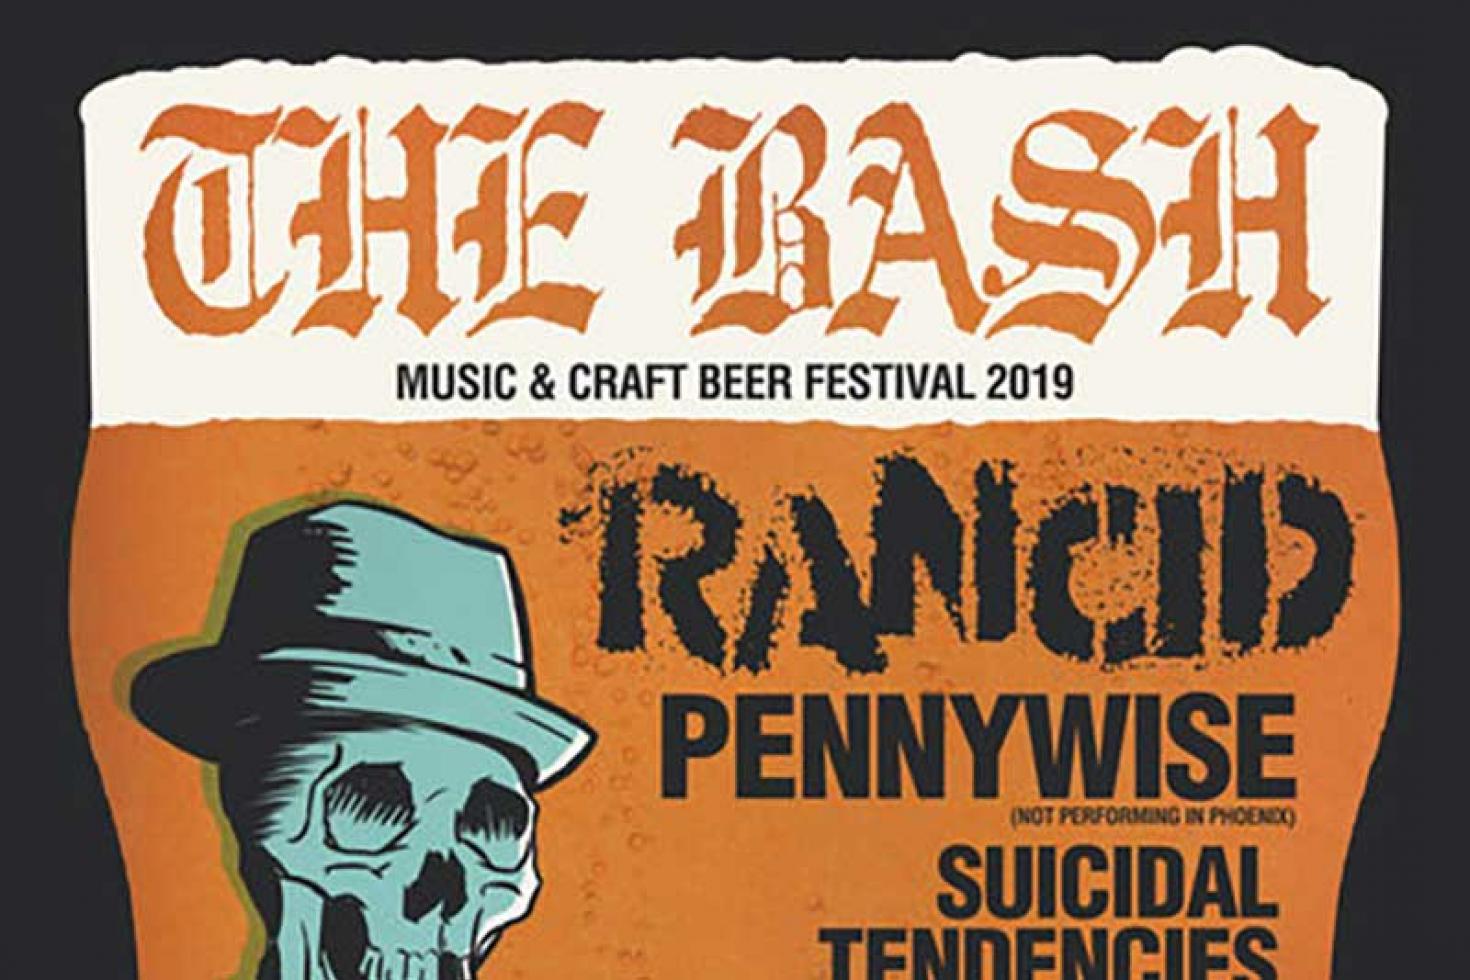 Rancid, Pennywise, L7 & more playing at The Bash